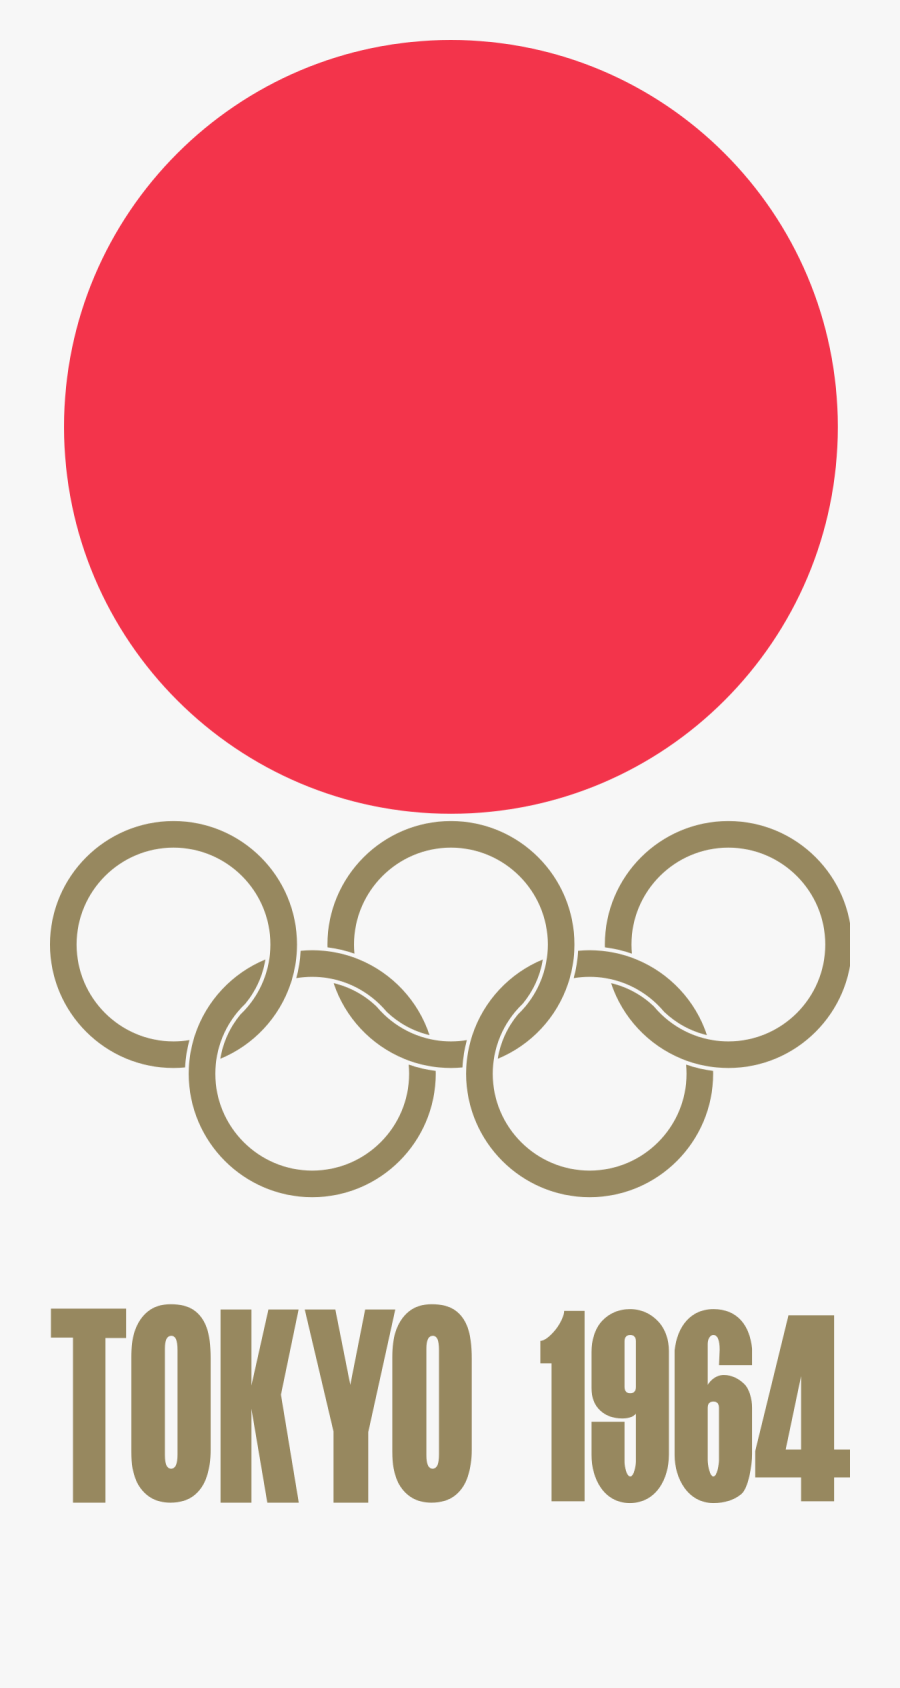 Transparent Olympic Rings Png - Tokyo 1964 Olympics Logo, Transparent Clipart